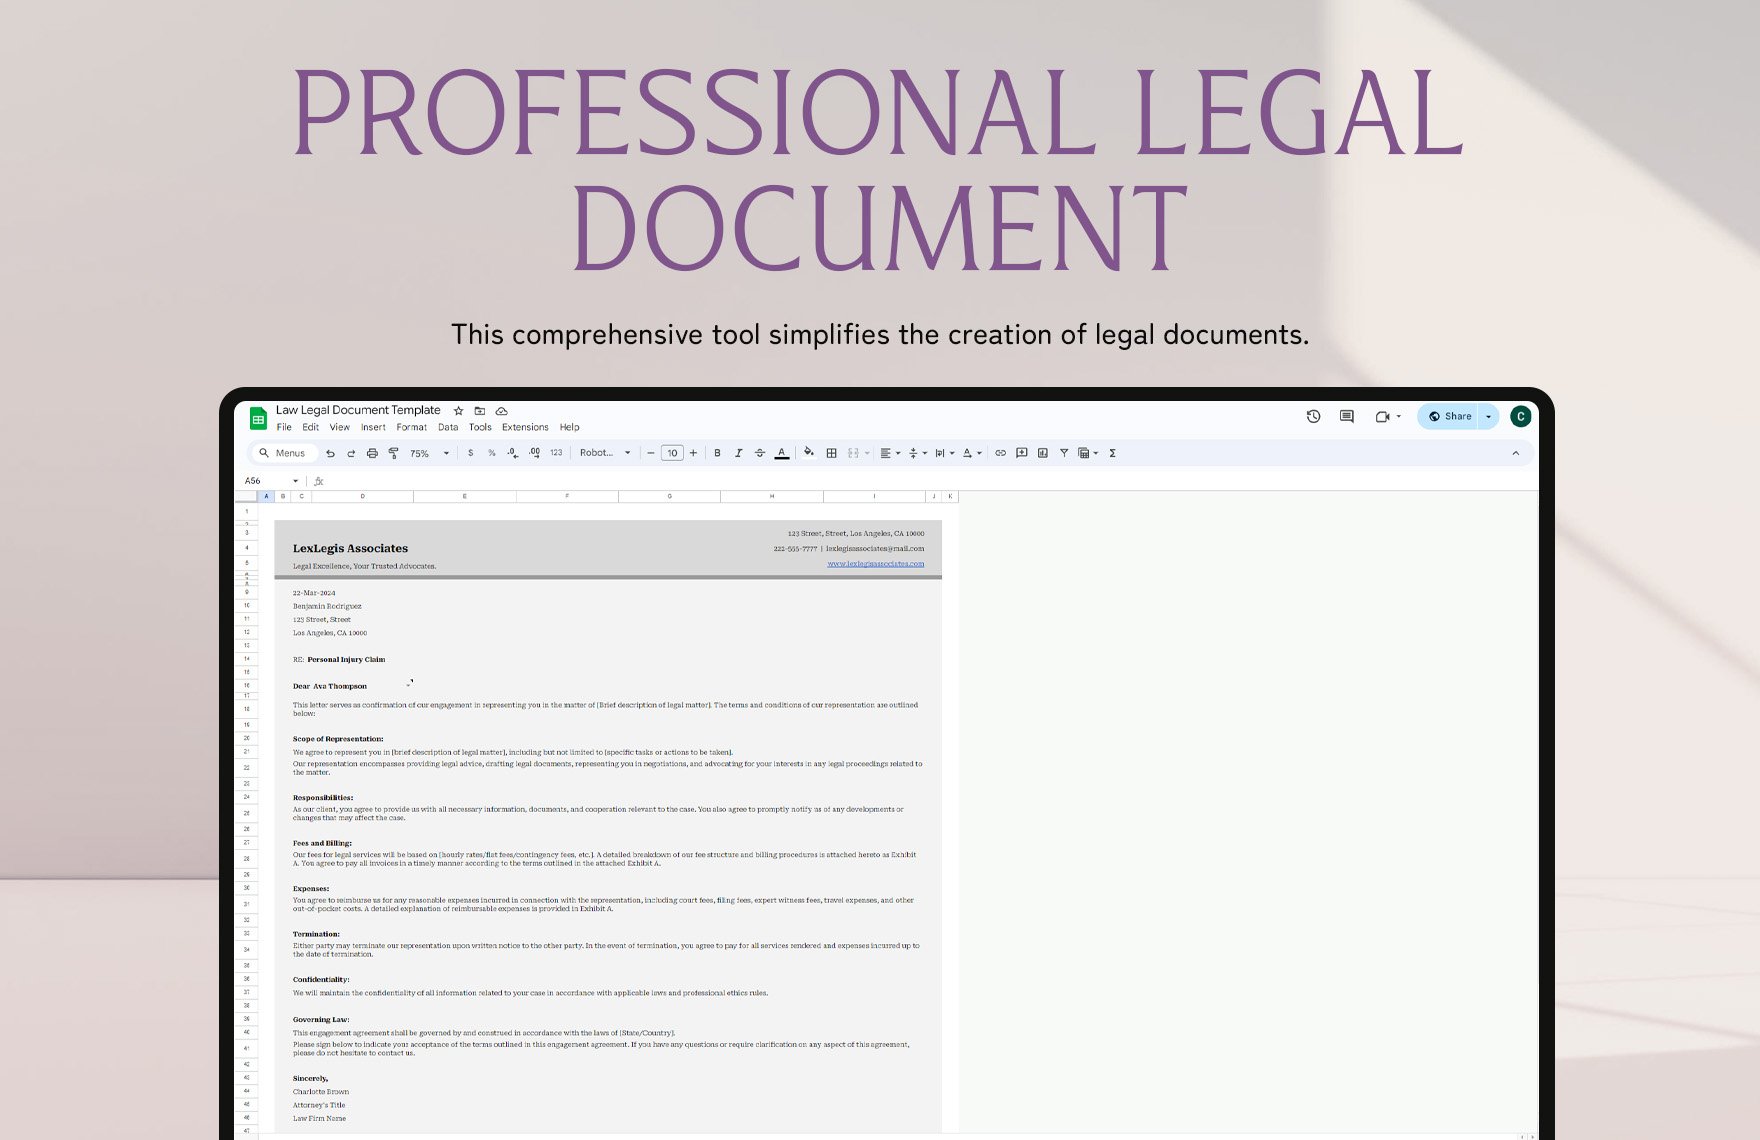 Law Legal Document Template